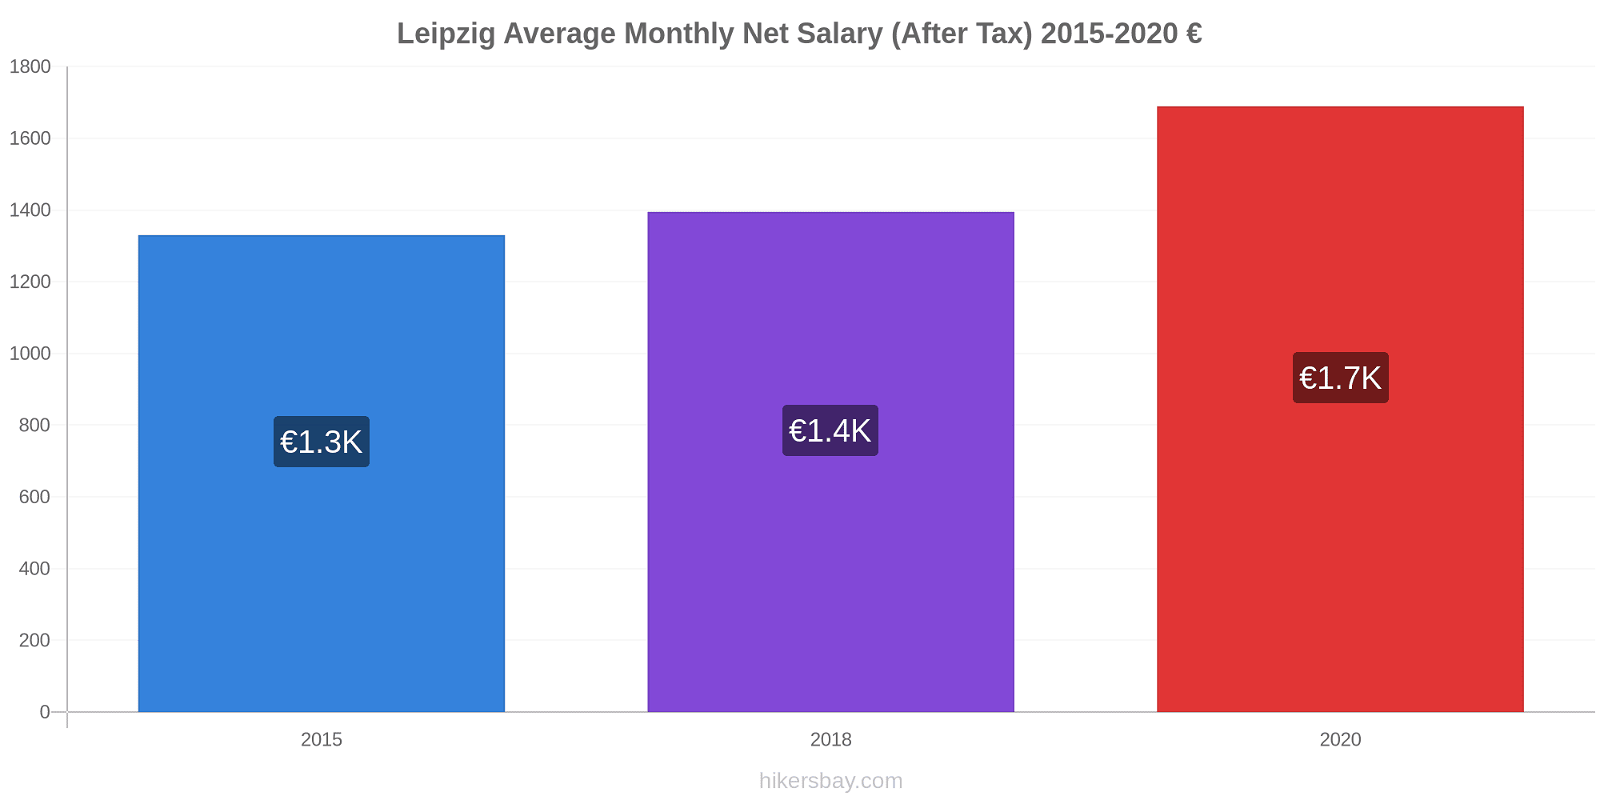 Leipzig price changes Average Monthly Net Salary (After Tax) hikersbay.com